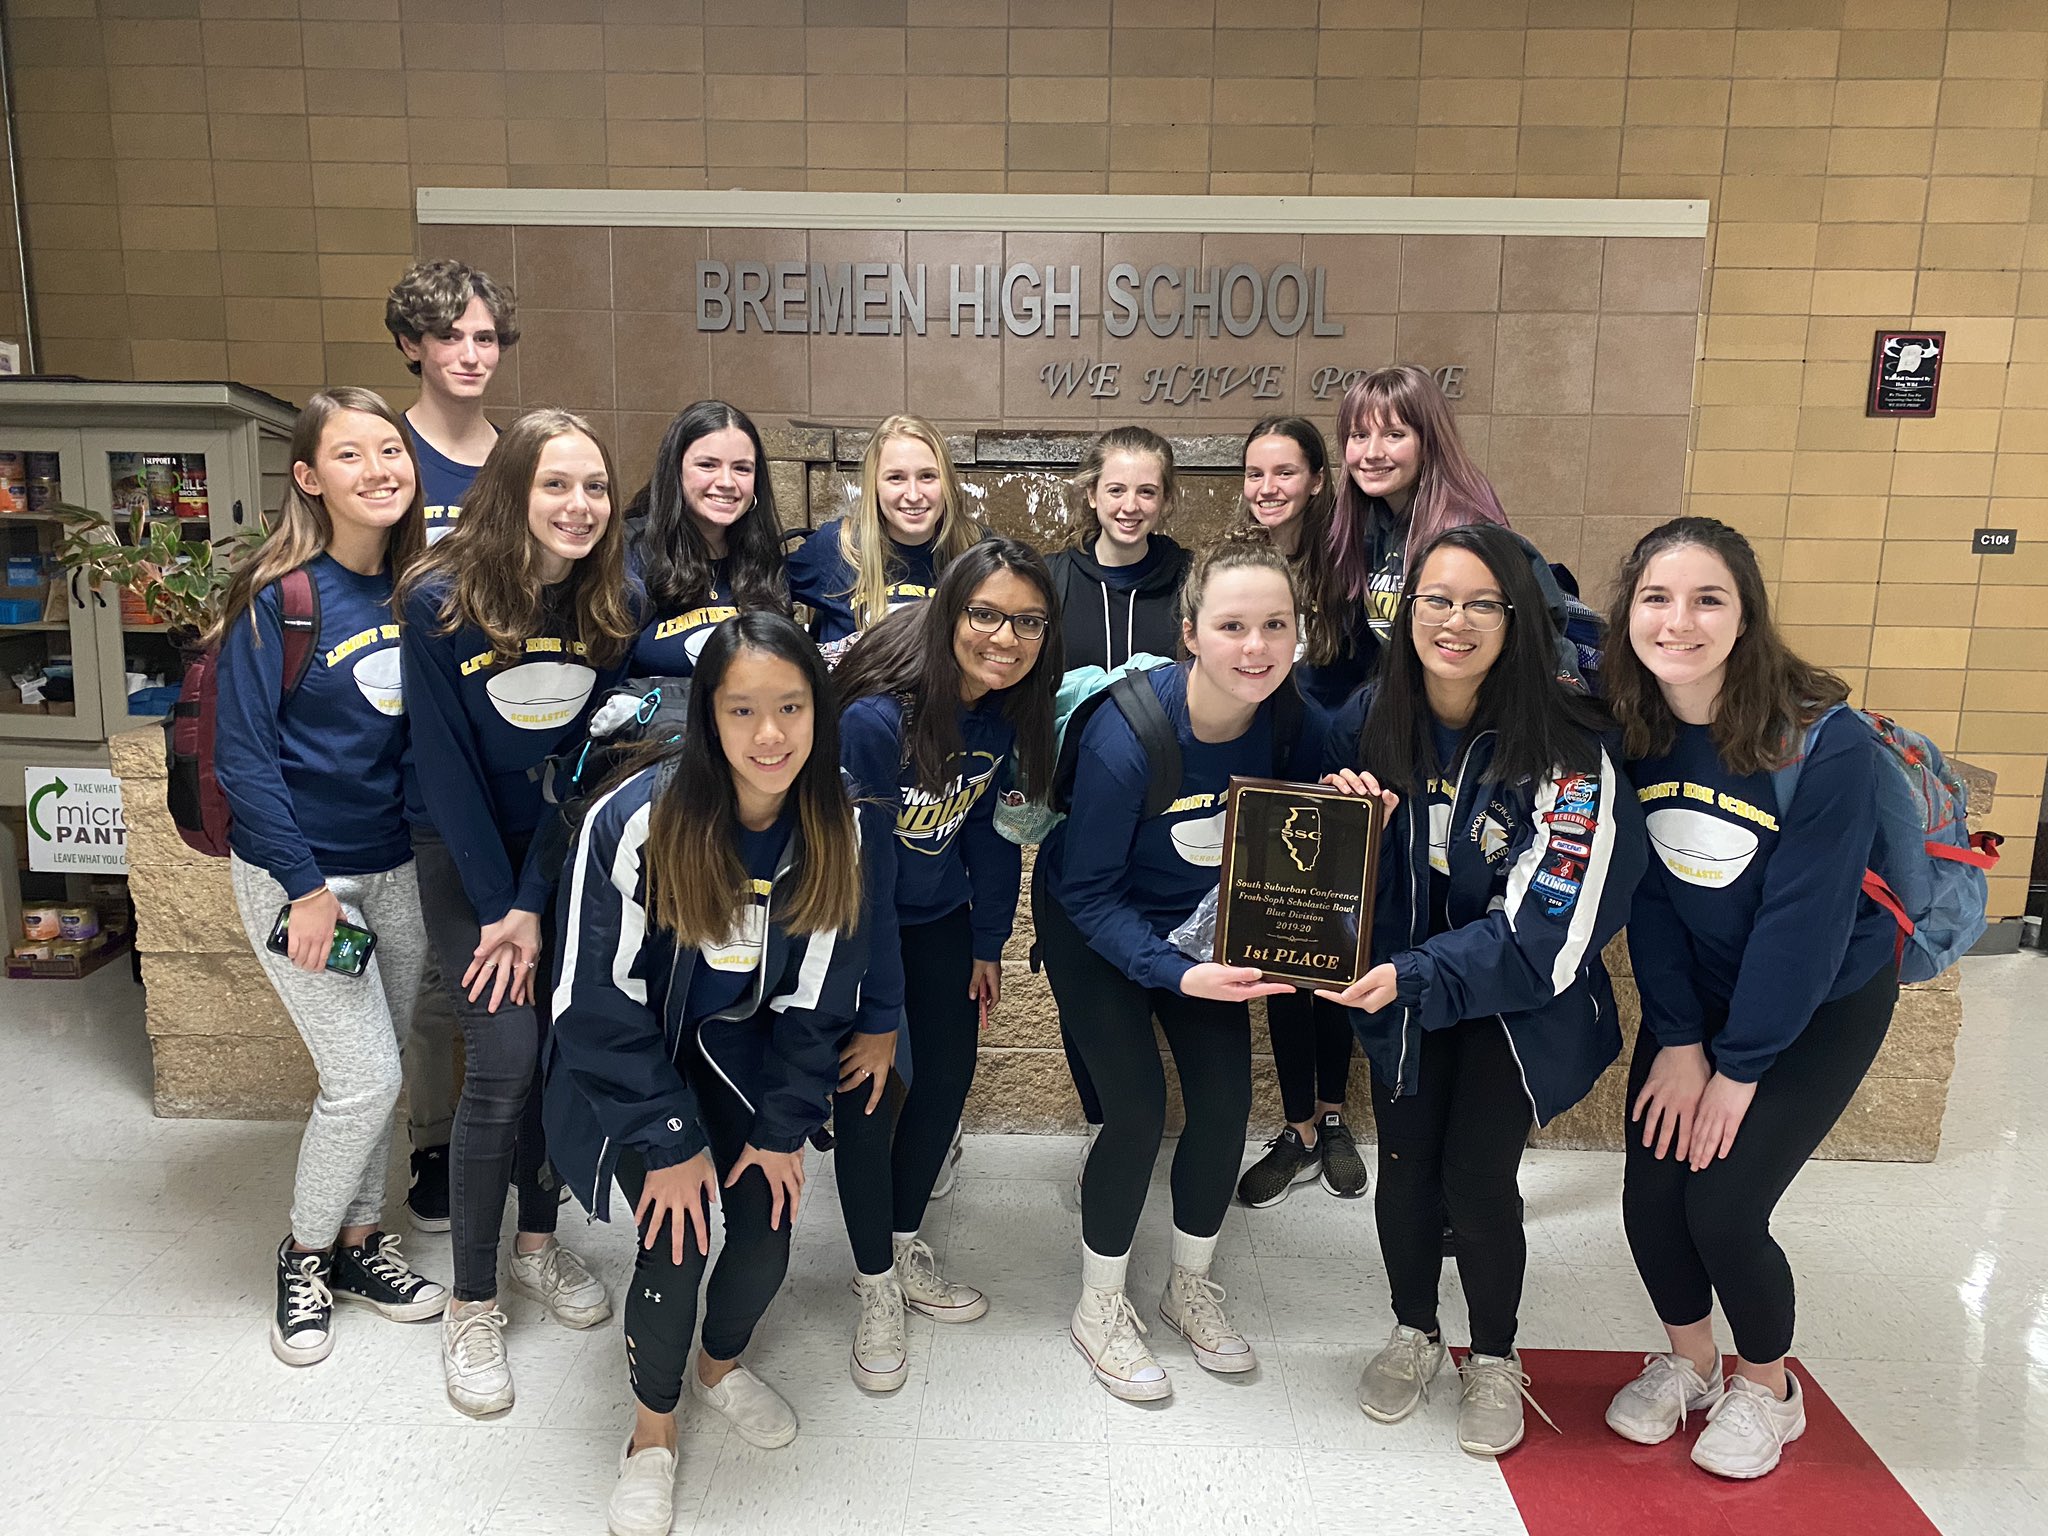 Justin Weidler The Future Is Bright For Lhs Scholastic Bowl As Our Jv Team Won 1st Place In The Ihsa Blue Conference At Bremen Hs Awesome Job Golemont T Co Gmopv8zehl